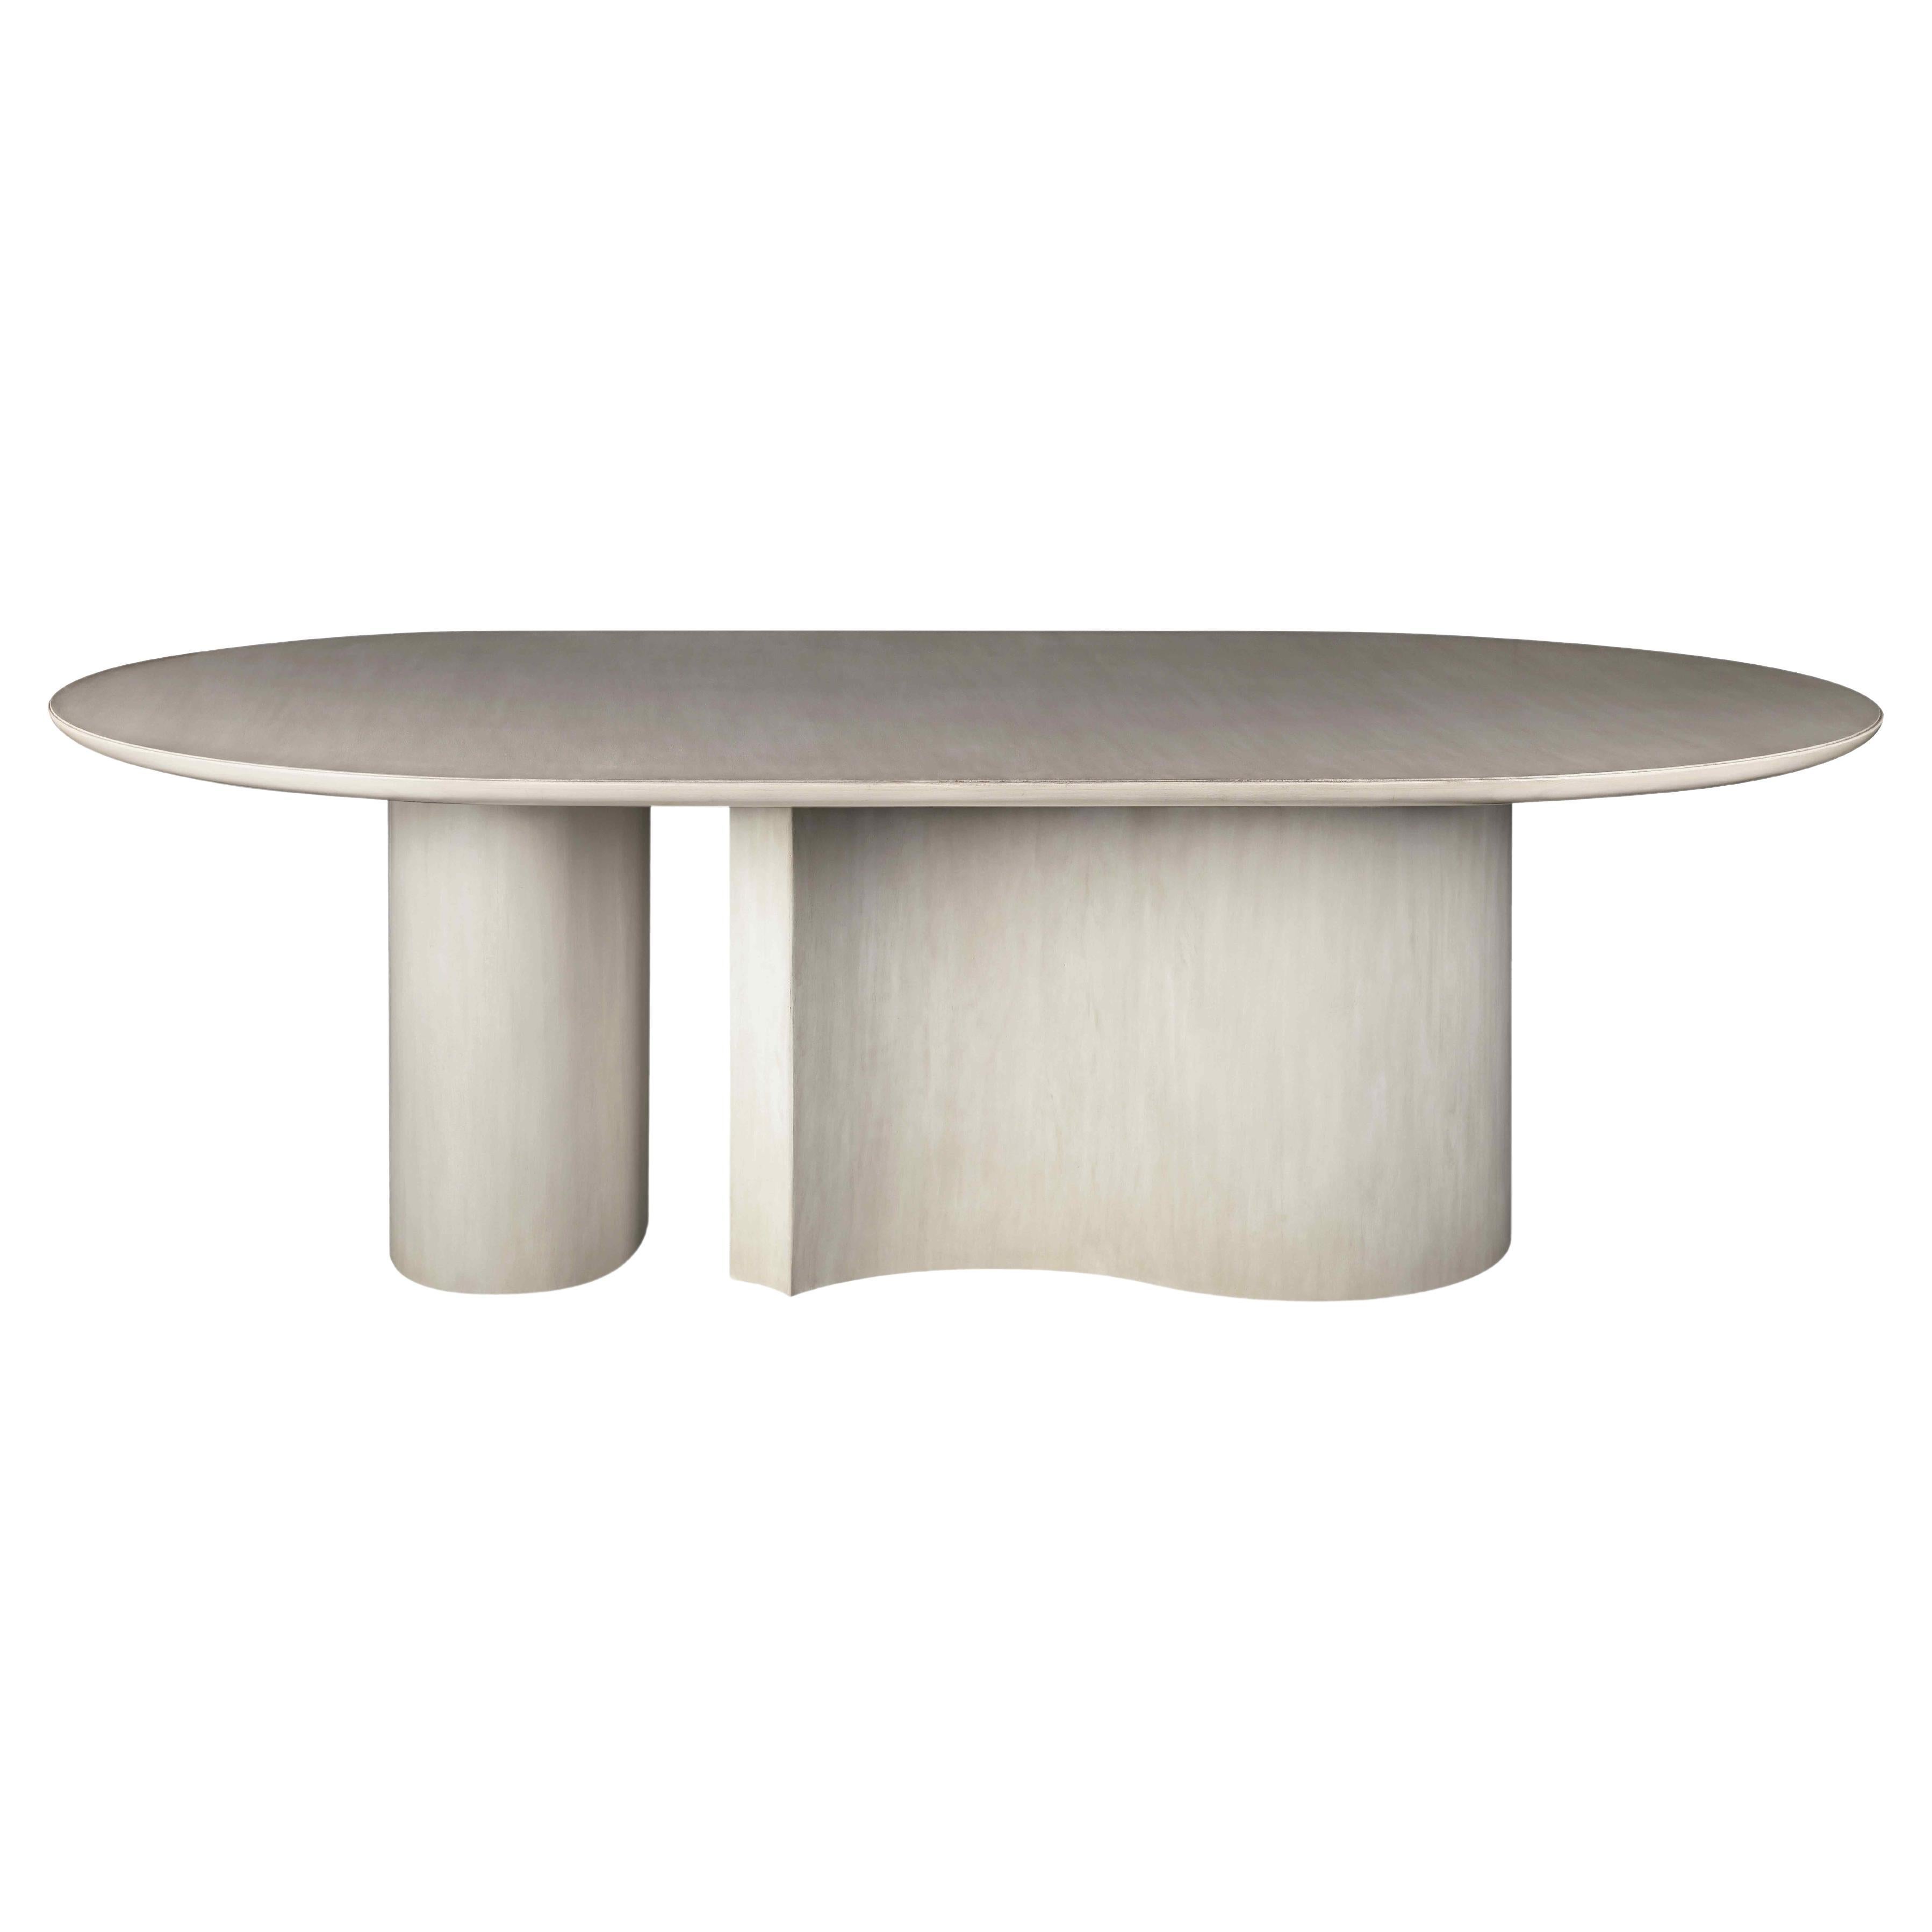 Wooden Tremouille Dining Table with Irregular Base and a Cylindrical Shape